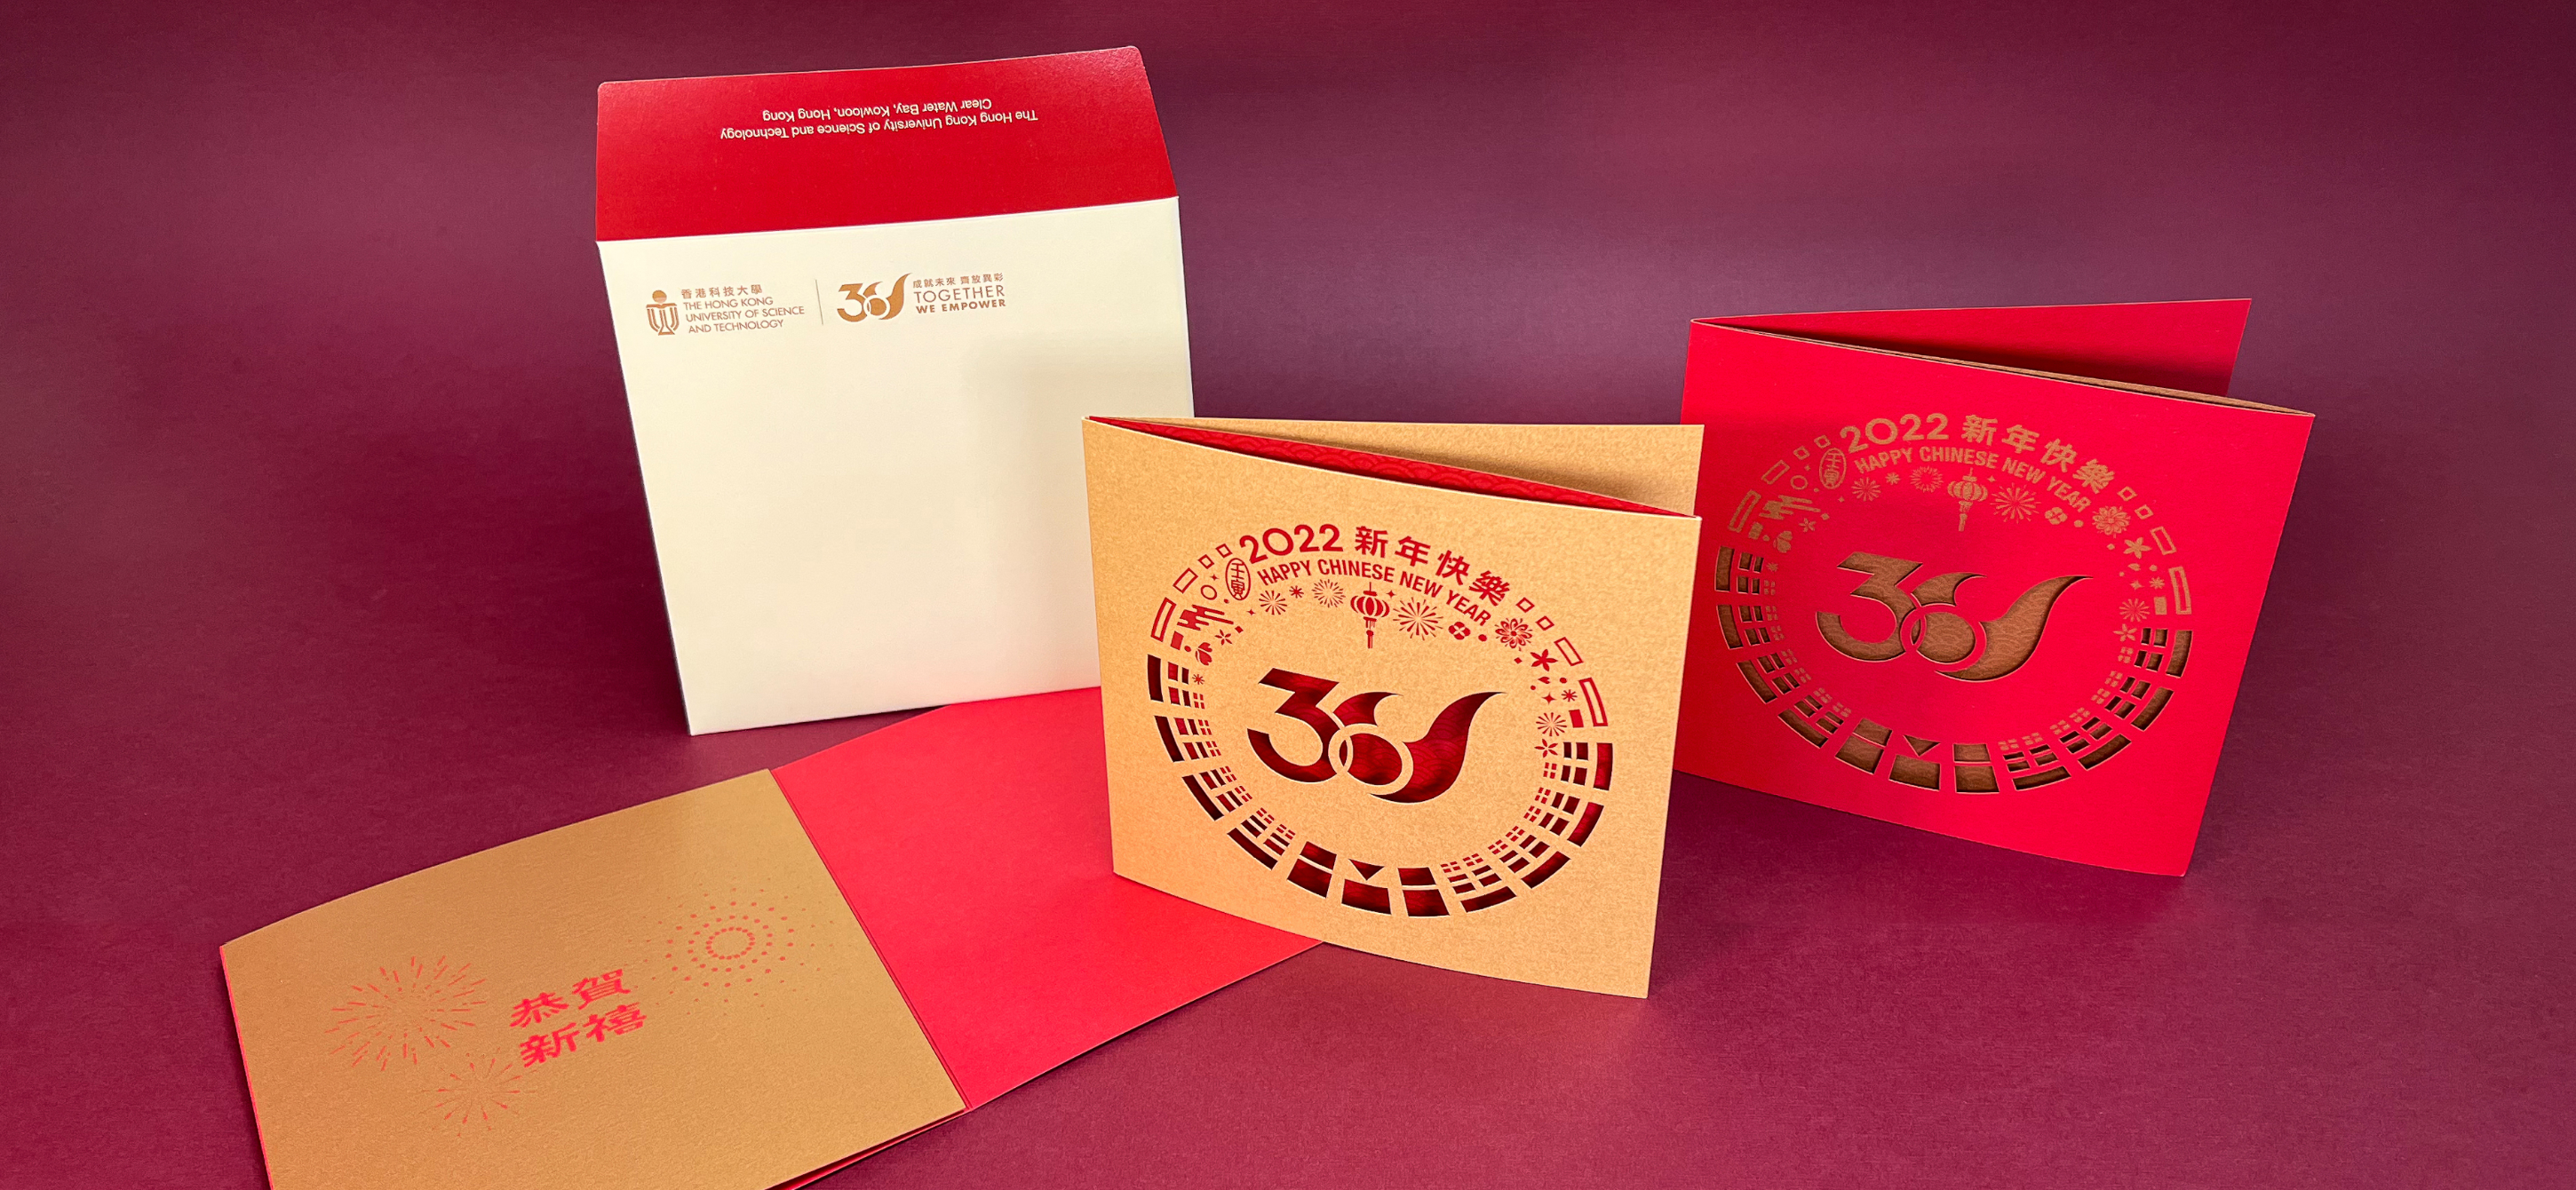 Chinese New Year Greeting Card - 30th Anniversary Edition